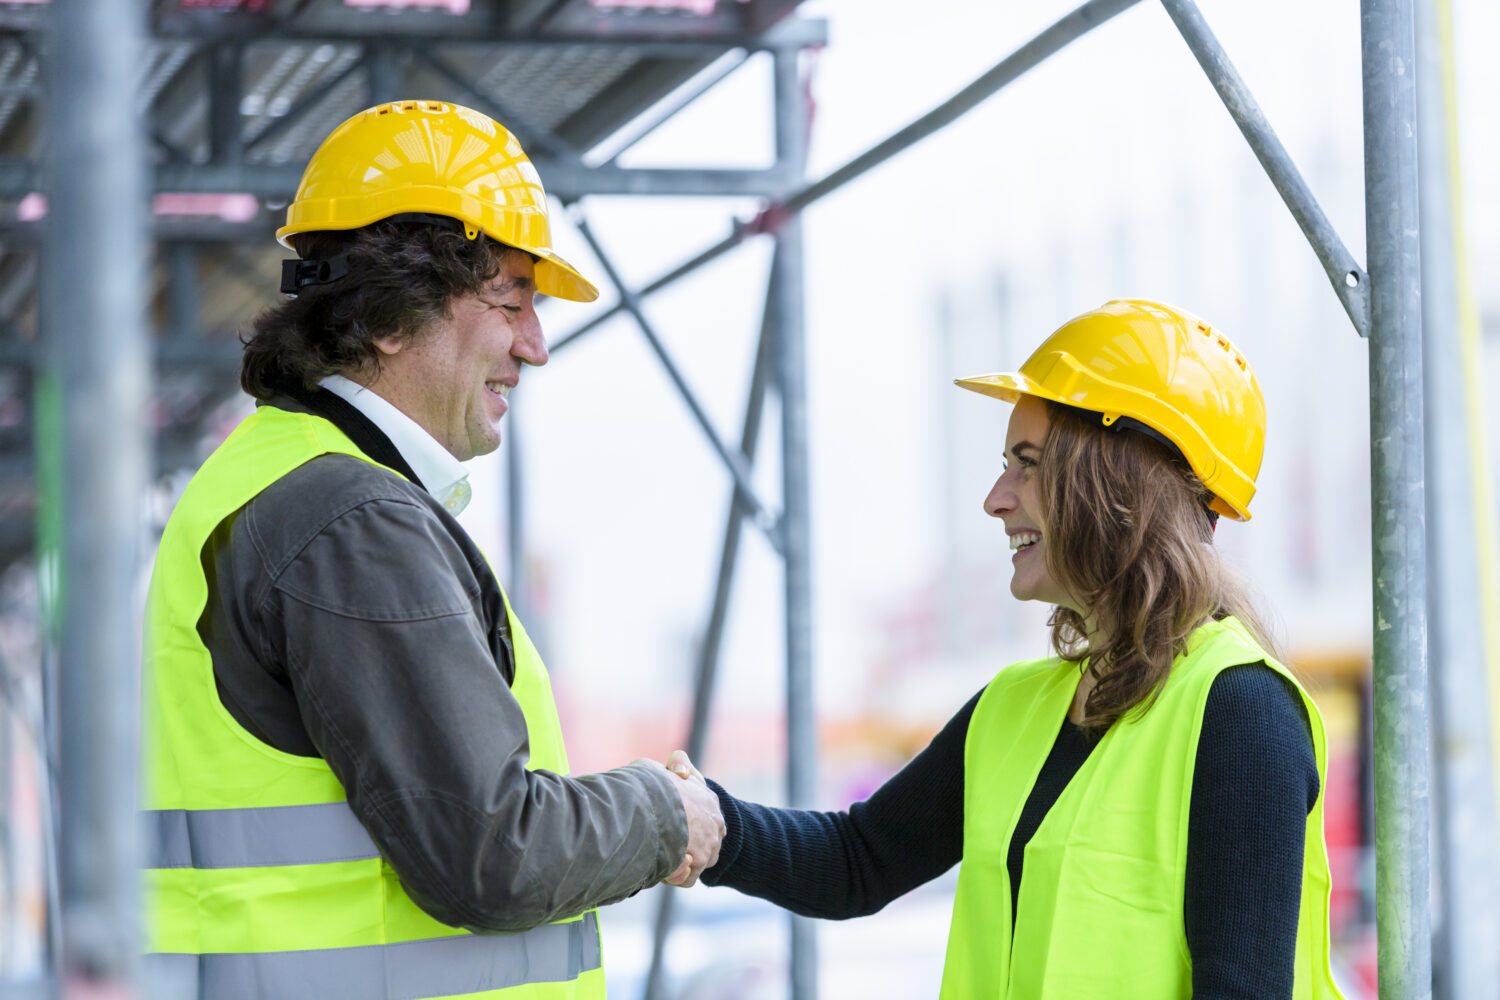 Two engineers, a man and a woman, with safety yellow jackets and hardhats, shaking hands